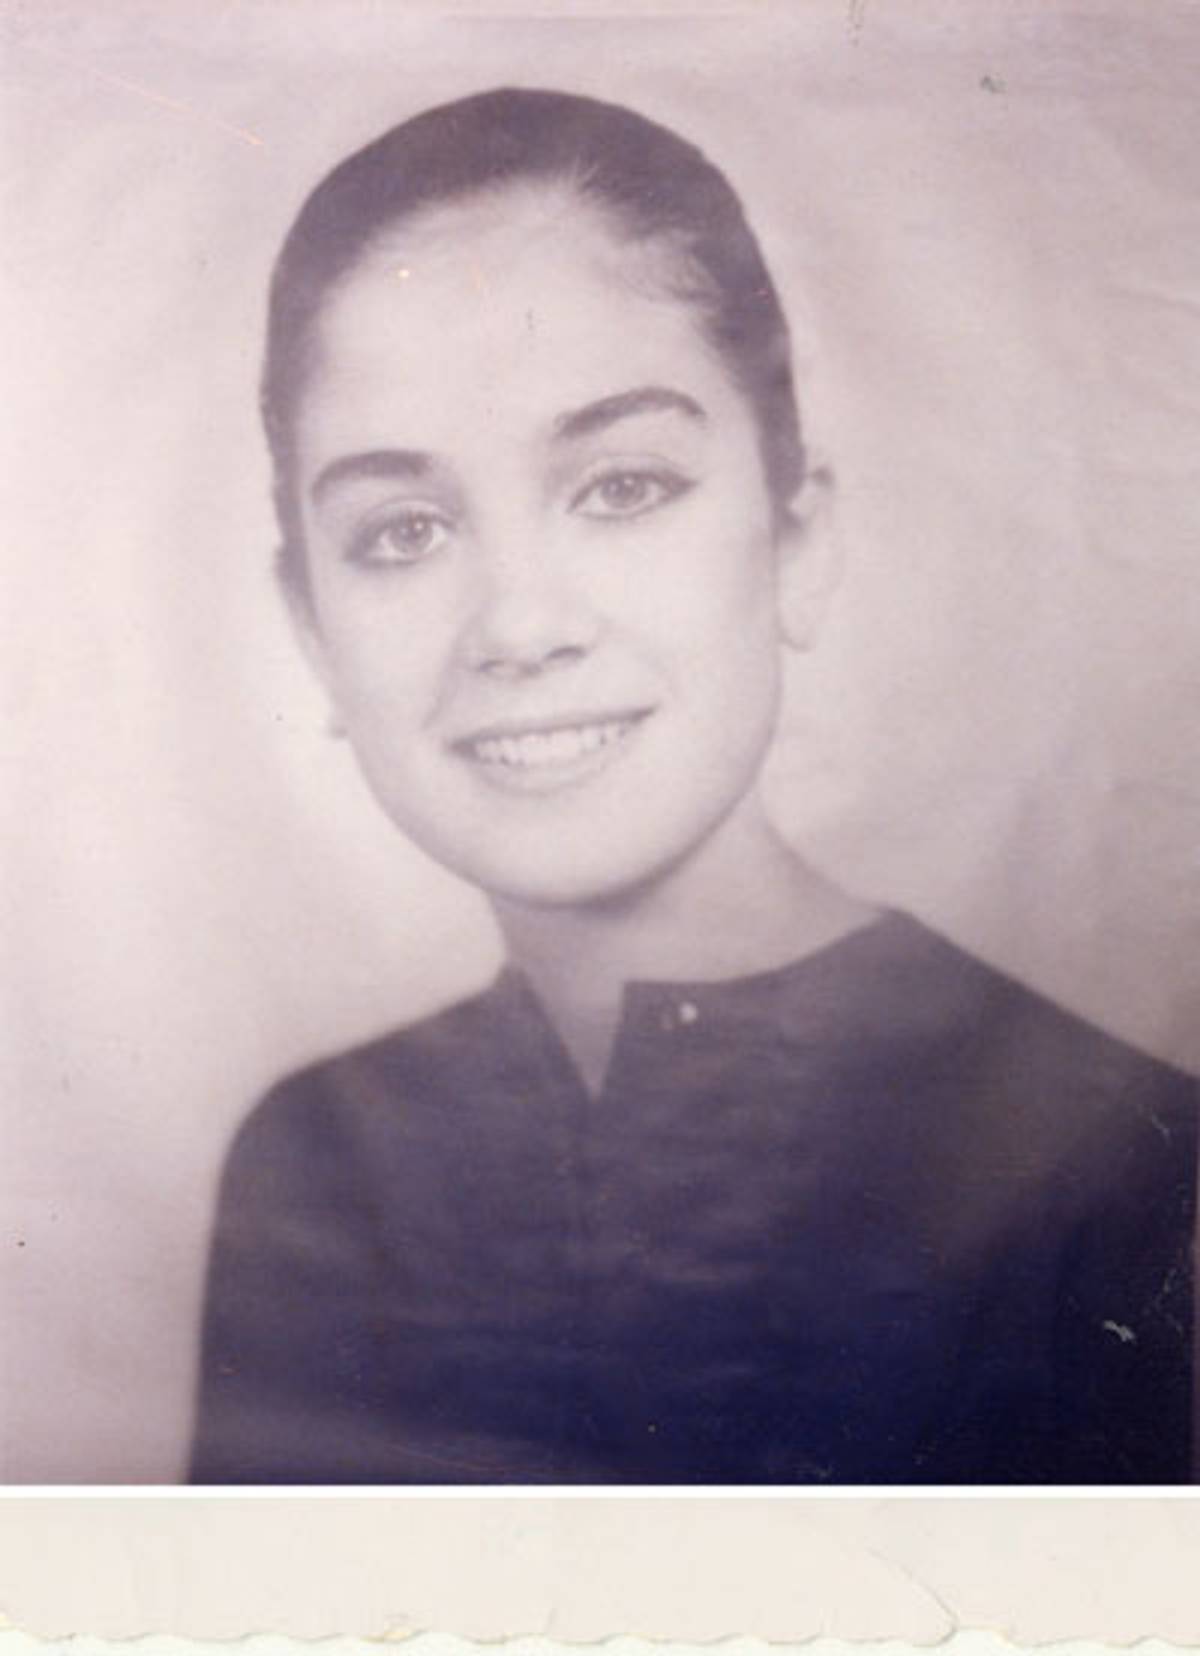 Janet’s photo in the 1959 Barnard graduation yearbook.